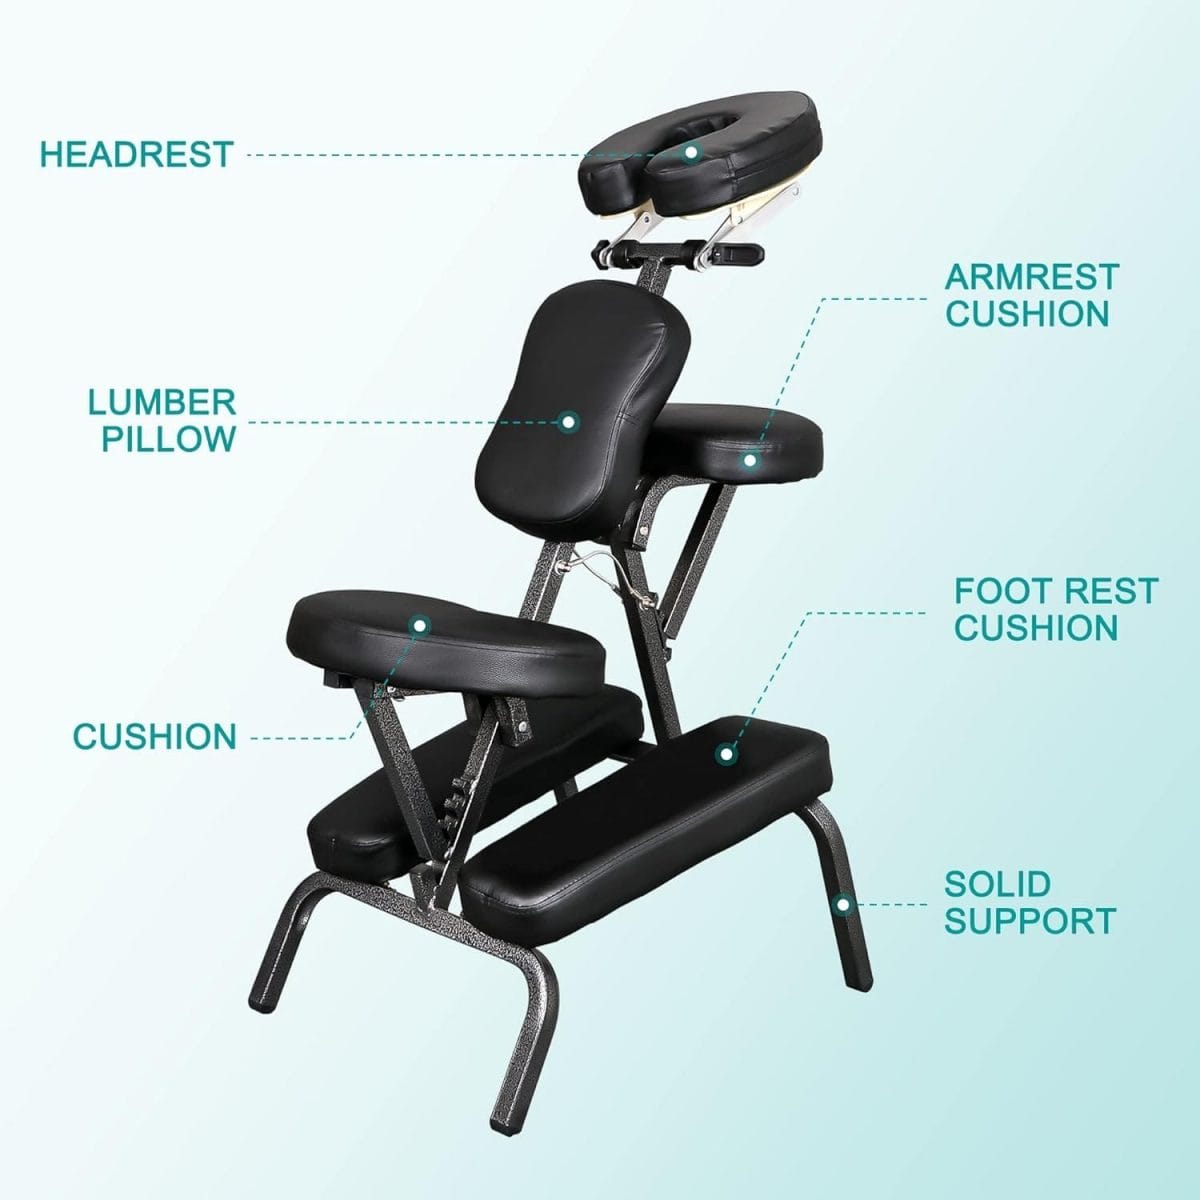 Nova Microdermabrasion Portable Massage Chair Foldable Tattoo Therapy 4 Inches Thickness Sponge Face Cradle Spa Salon Chair